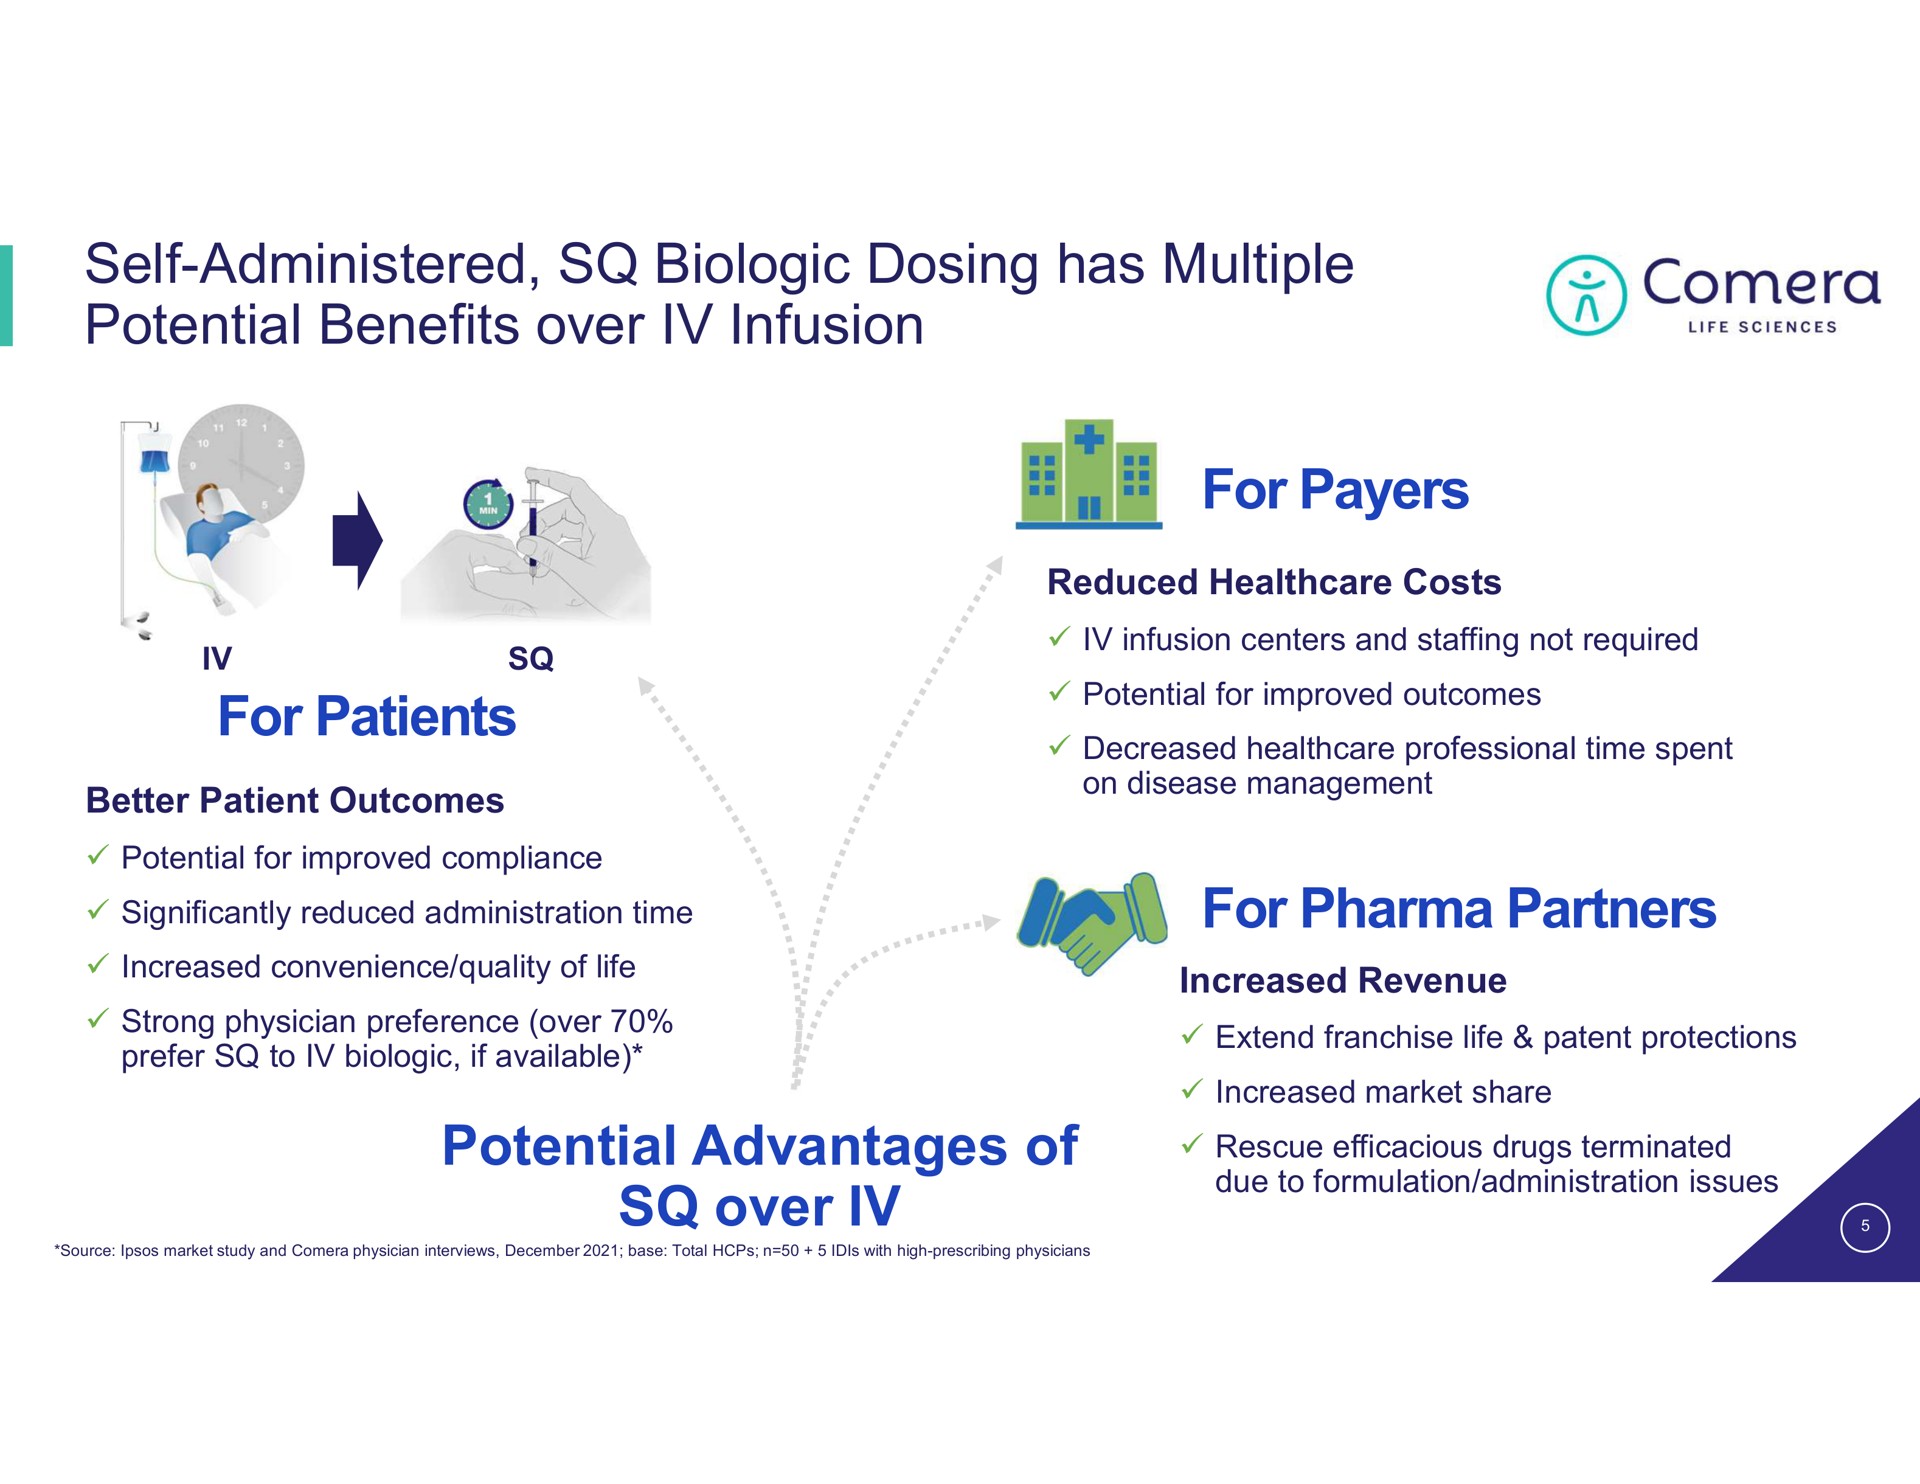 self administered biologic dosing has multiple potential benefits over infusion for patients potential advantages of over for payers for partners | Comera